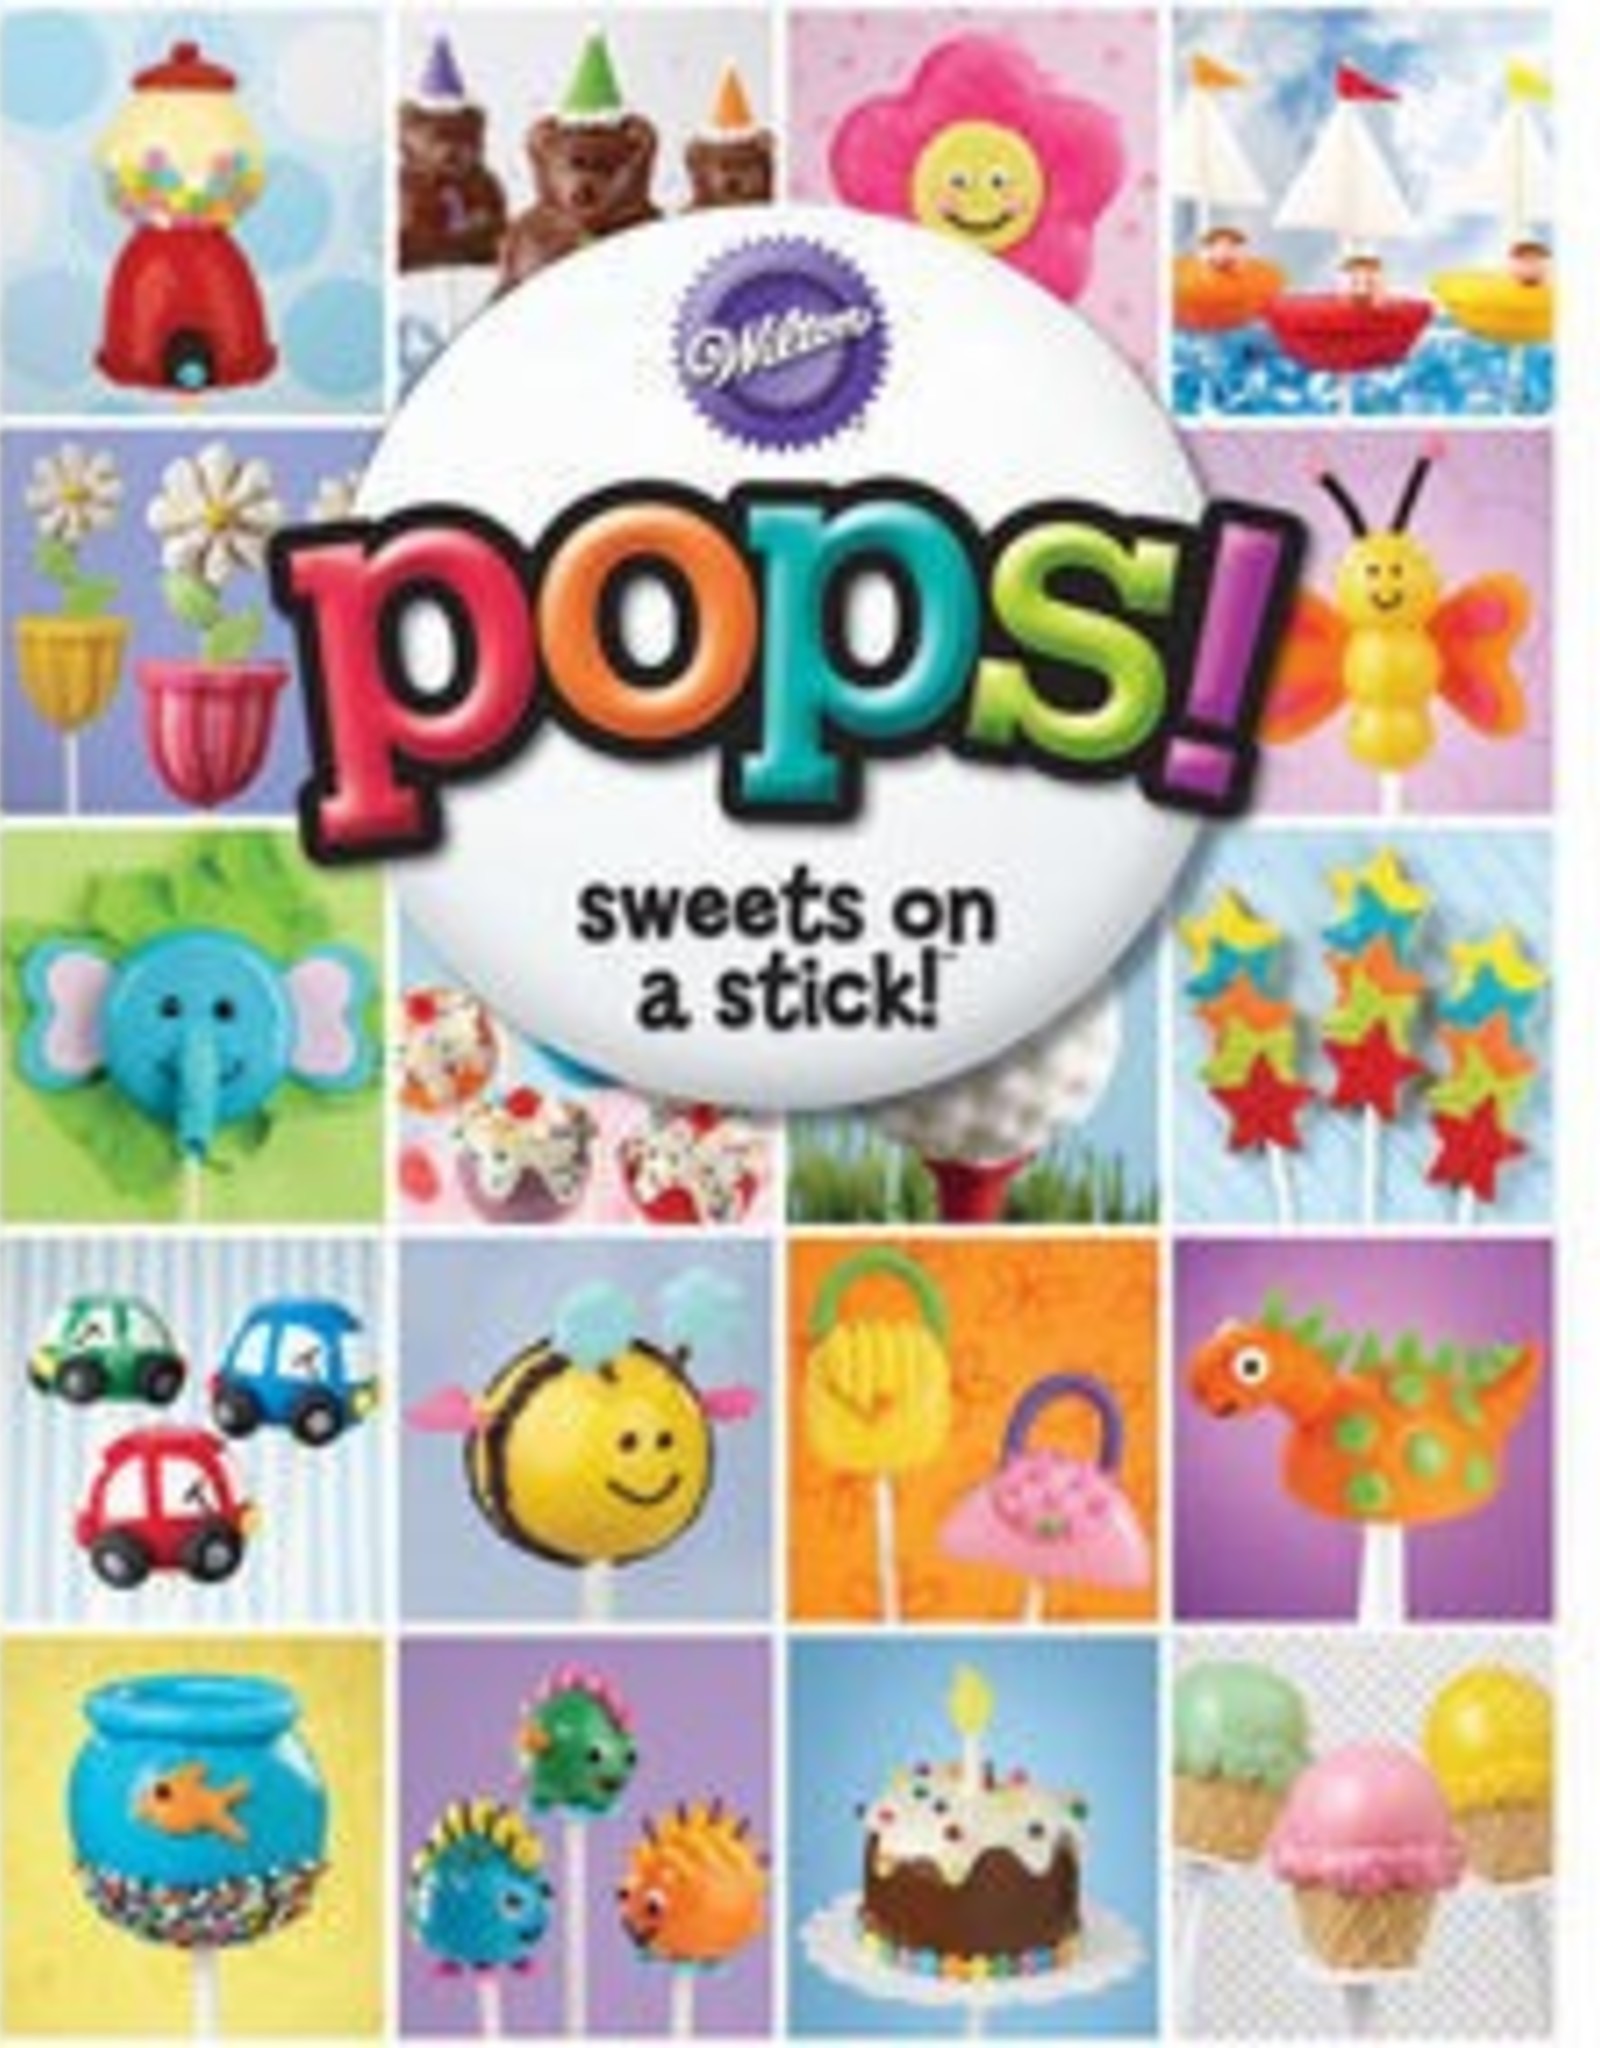 Pops Sweets on a Stick (Wilton Cake Pop Book)